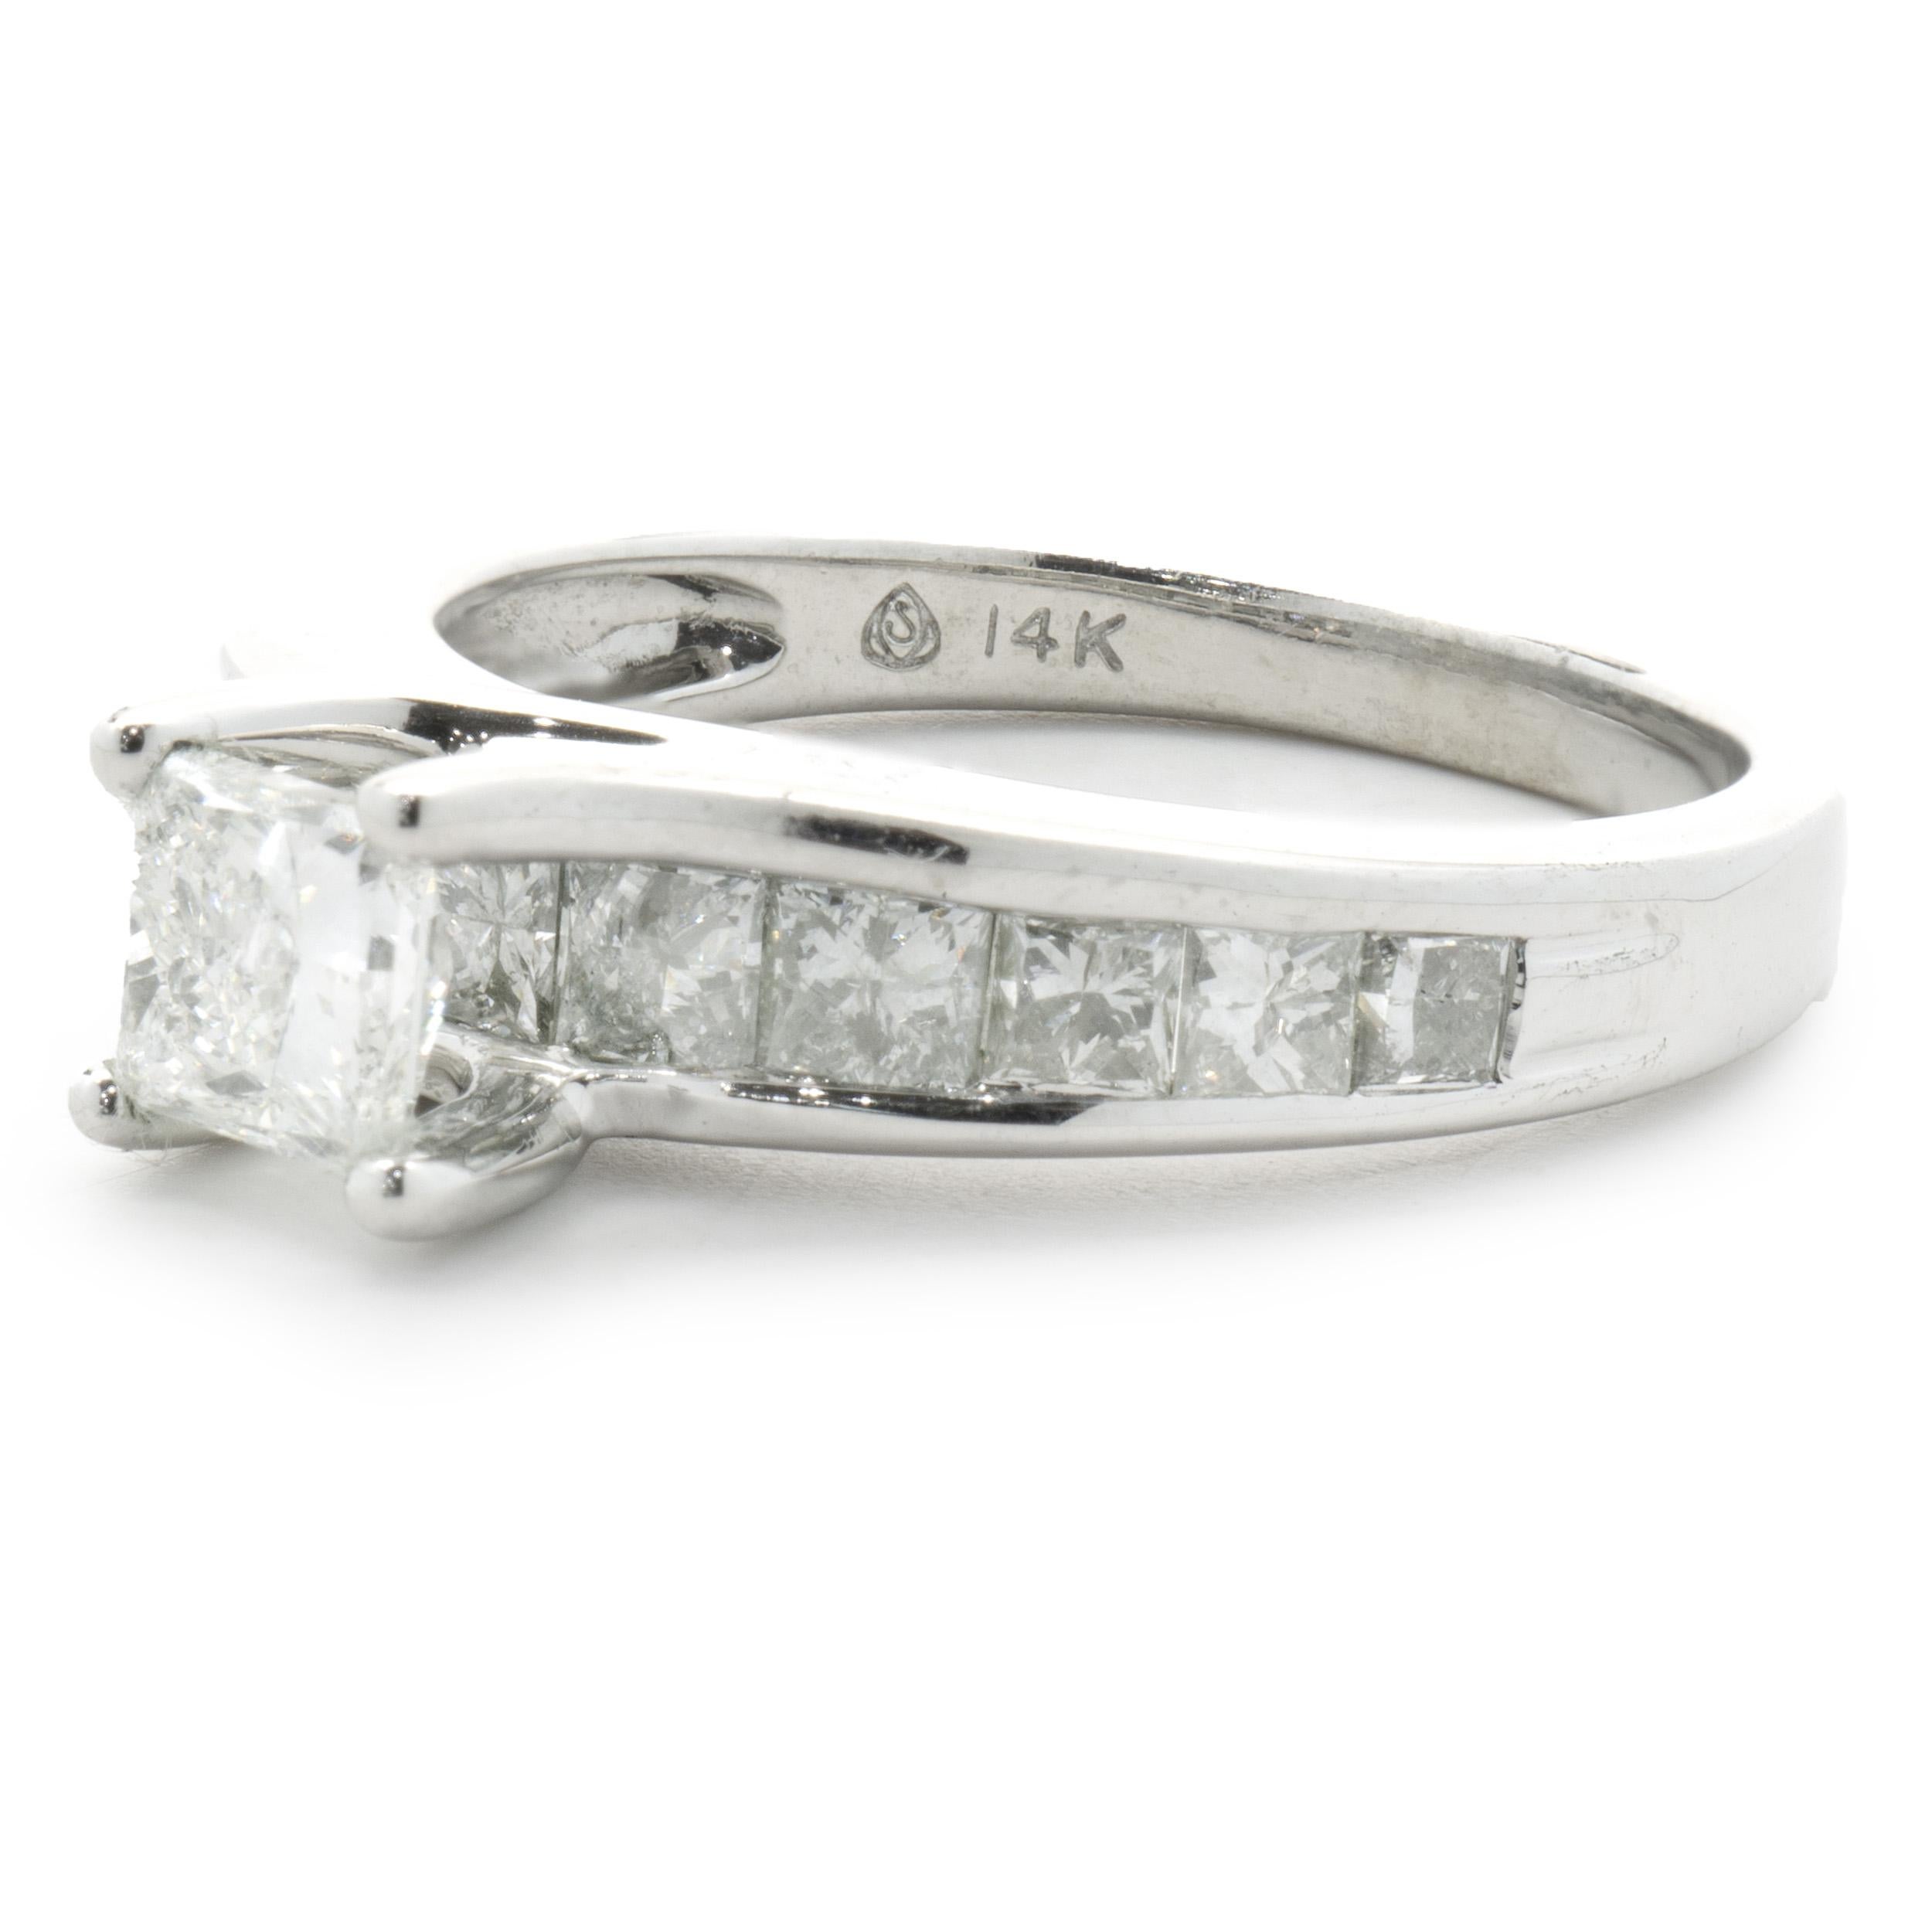 Designer: Custom
Material: 14K white gold
Diamond: 1 princes cut = 0.65ct
Color: G
Clarity: I1
Diamond: 11 princess cut = 1.65cttw
Color: G
Clarity: SI1
Dimensions: ring top measures 6mm wide
Ring Size: 8 (complimentary sizing available)
Weight: